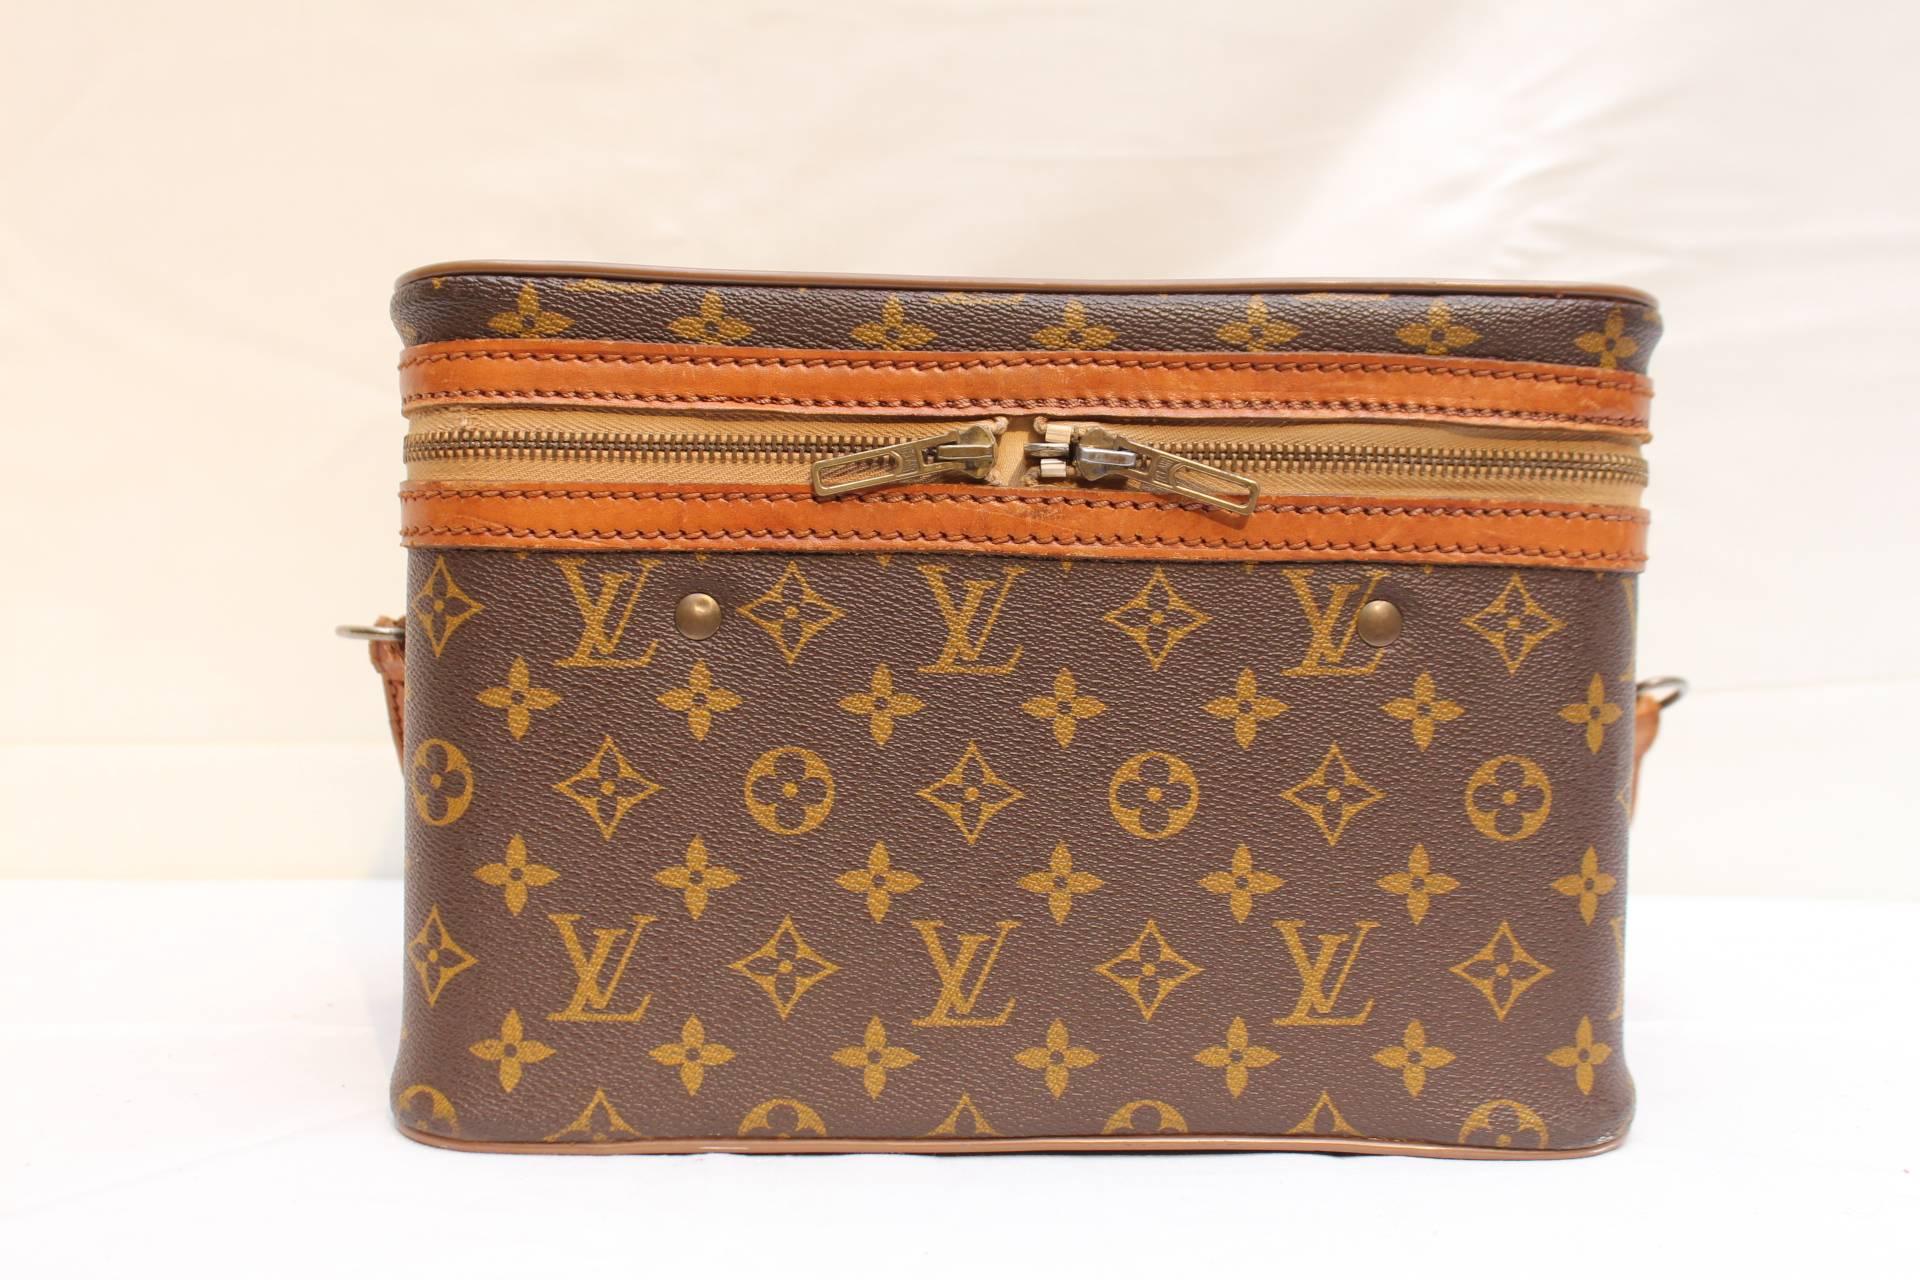 The iconic Louis Vuitton vanity case in the classic monogram with golden brass hardware. The interior in a cream leather with three holders and two pockets. Corners reinforced with leather. 